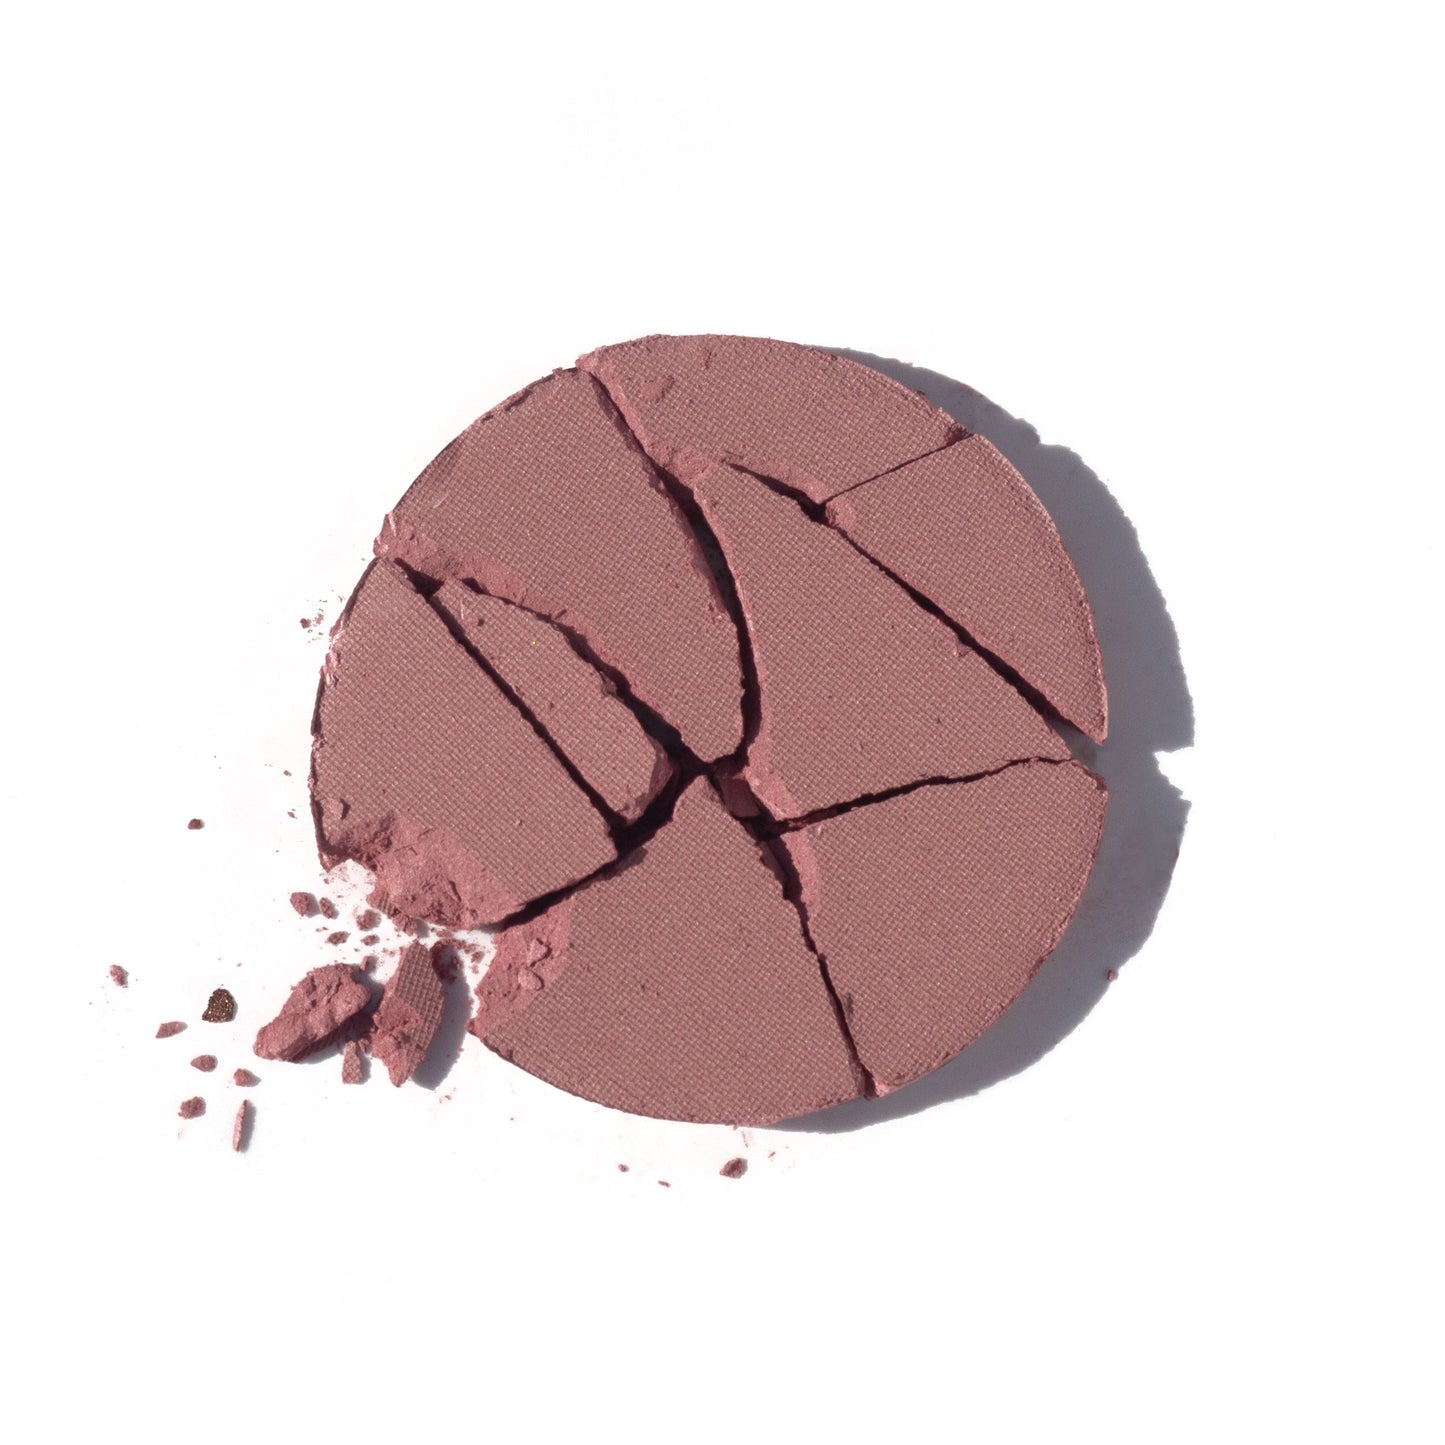 
                  
                    Go - Soft Muted Pink - multi use pressed shadow + blush colour - broken palette displayed on a white background.
                  
                